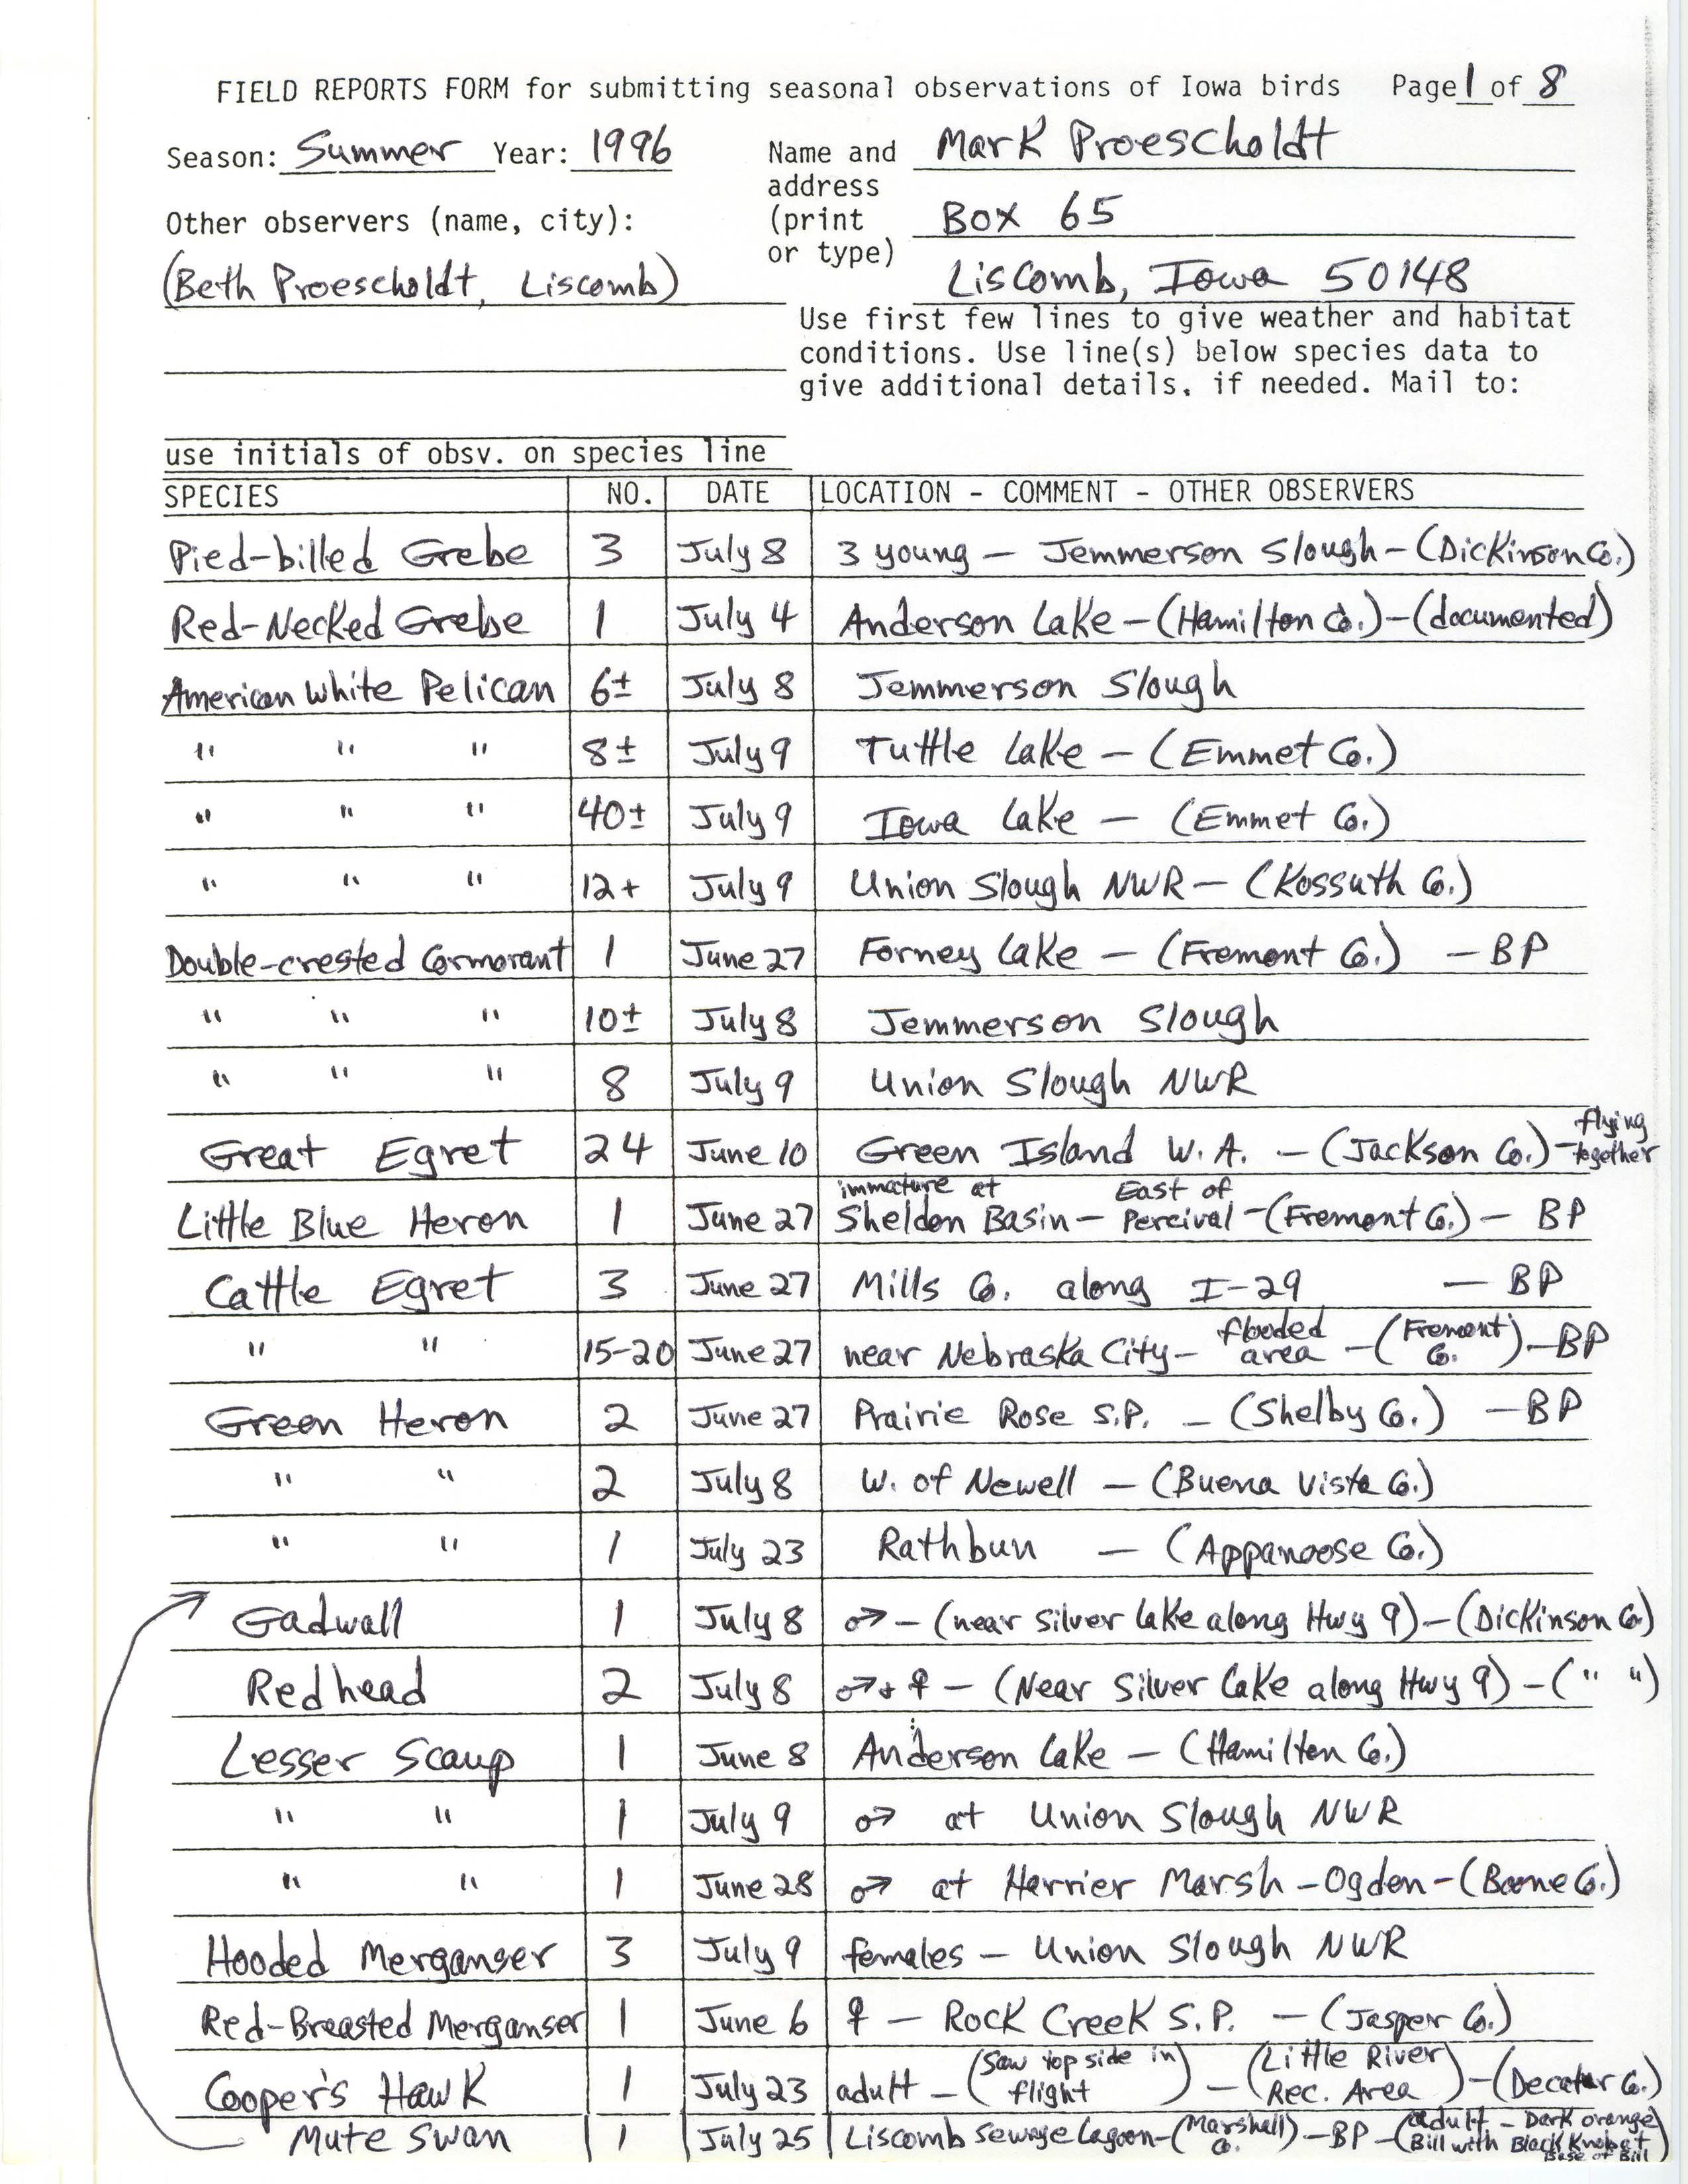 Field reports form for submitting seasonal observations of Iowa birds, Mark Proescholdt, summer 1996